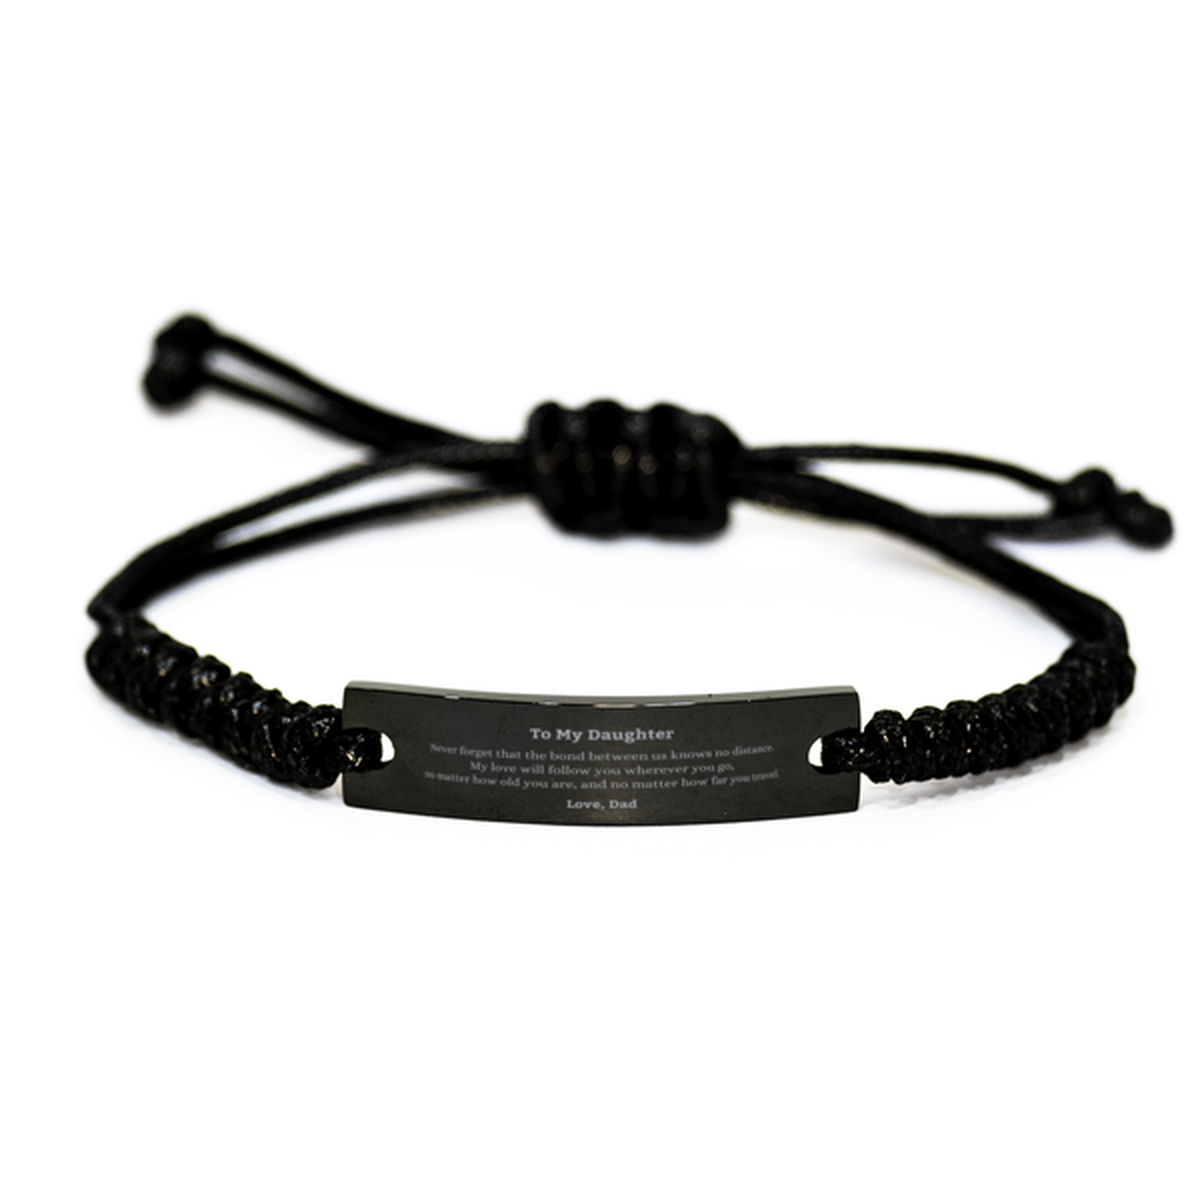 Daughter Birthday Gifts from Dad, Adjustable Black Rope Bracelet for Daughter Christmas Graduation Unique Gifts Daughter Never forget that the bond between us knows no distance. Love, Dad